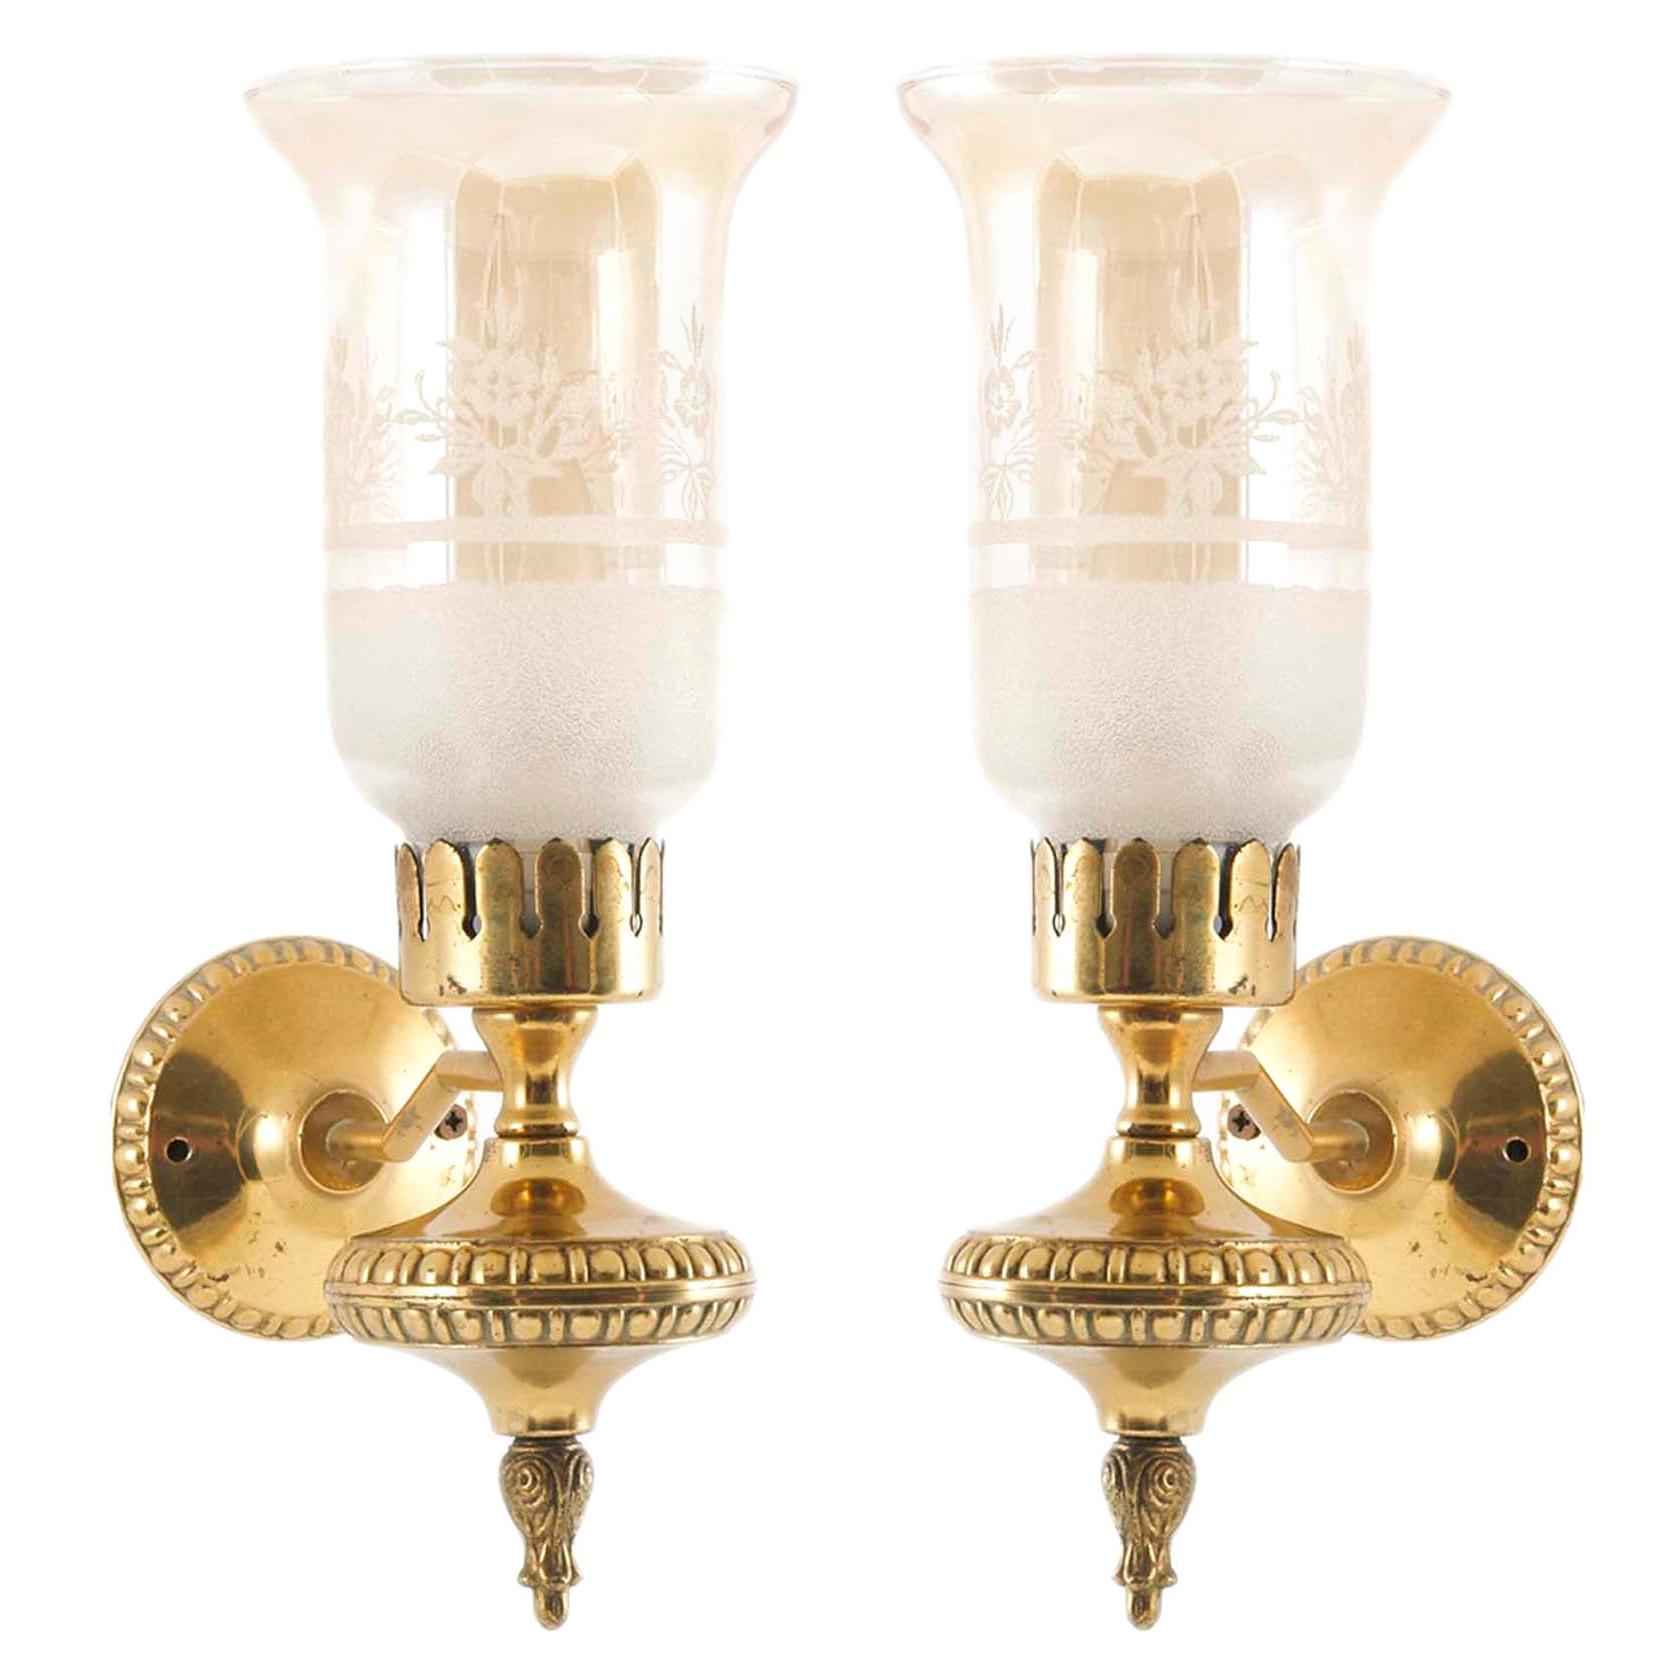 Florence 1930s Art Deco Wall Sconces Attributed to Bruno Chiarini, Murano Glass For Sale